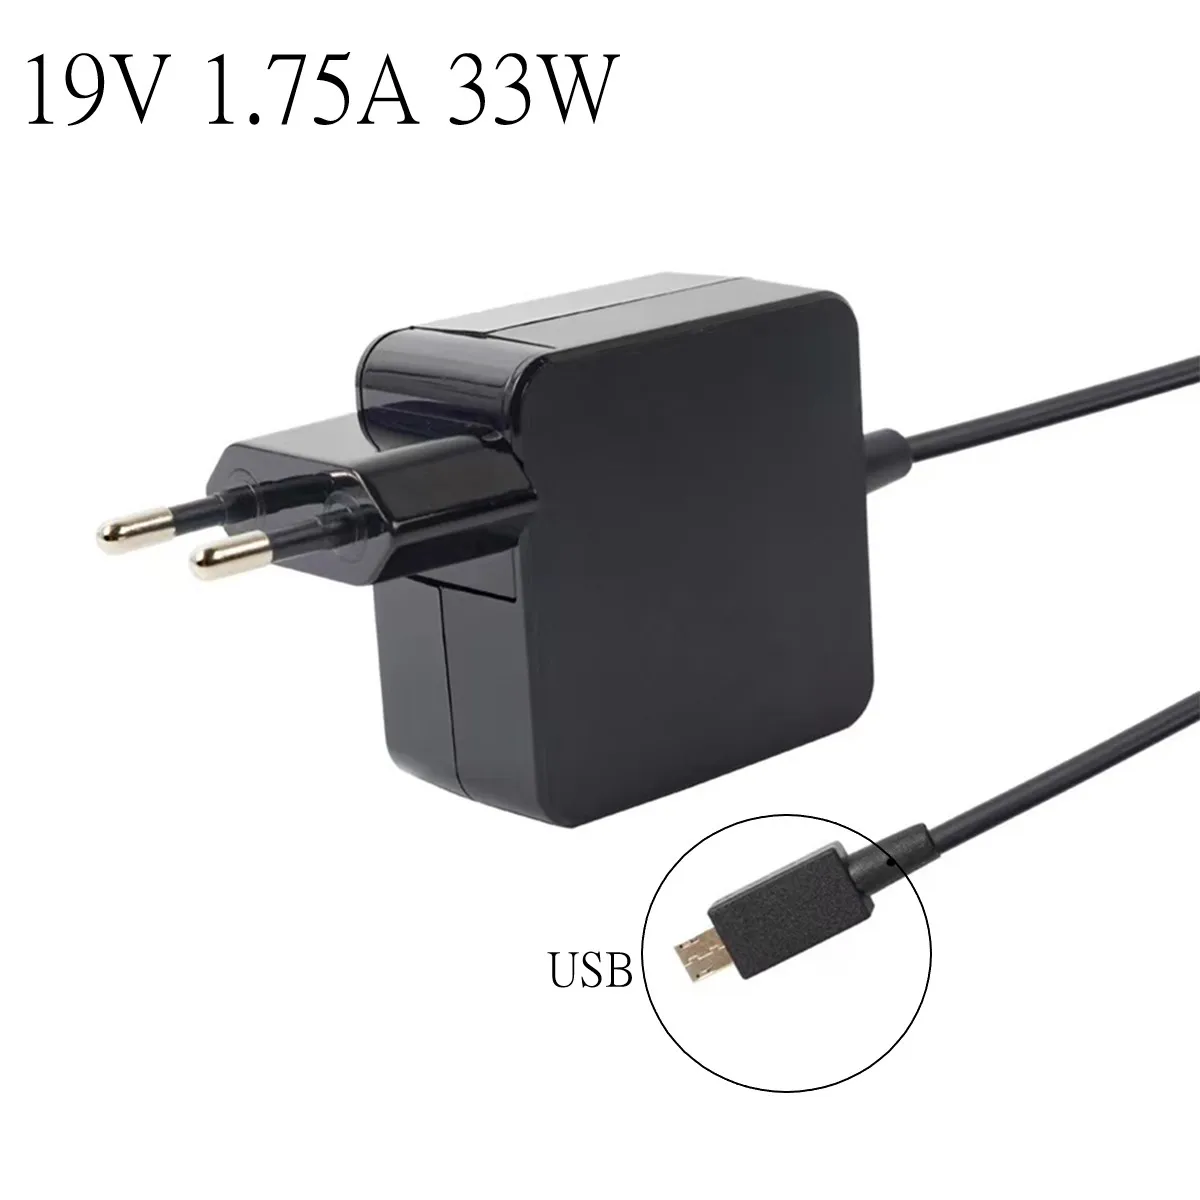 

19V 1.75A 33W Micro USB Laptop Charger Power Adapter For Asus Eeebook X205T X205TA TP200S E202 E202SA E205SA A3050 Power Supply